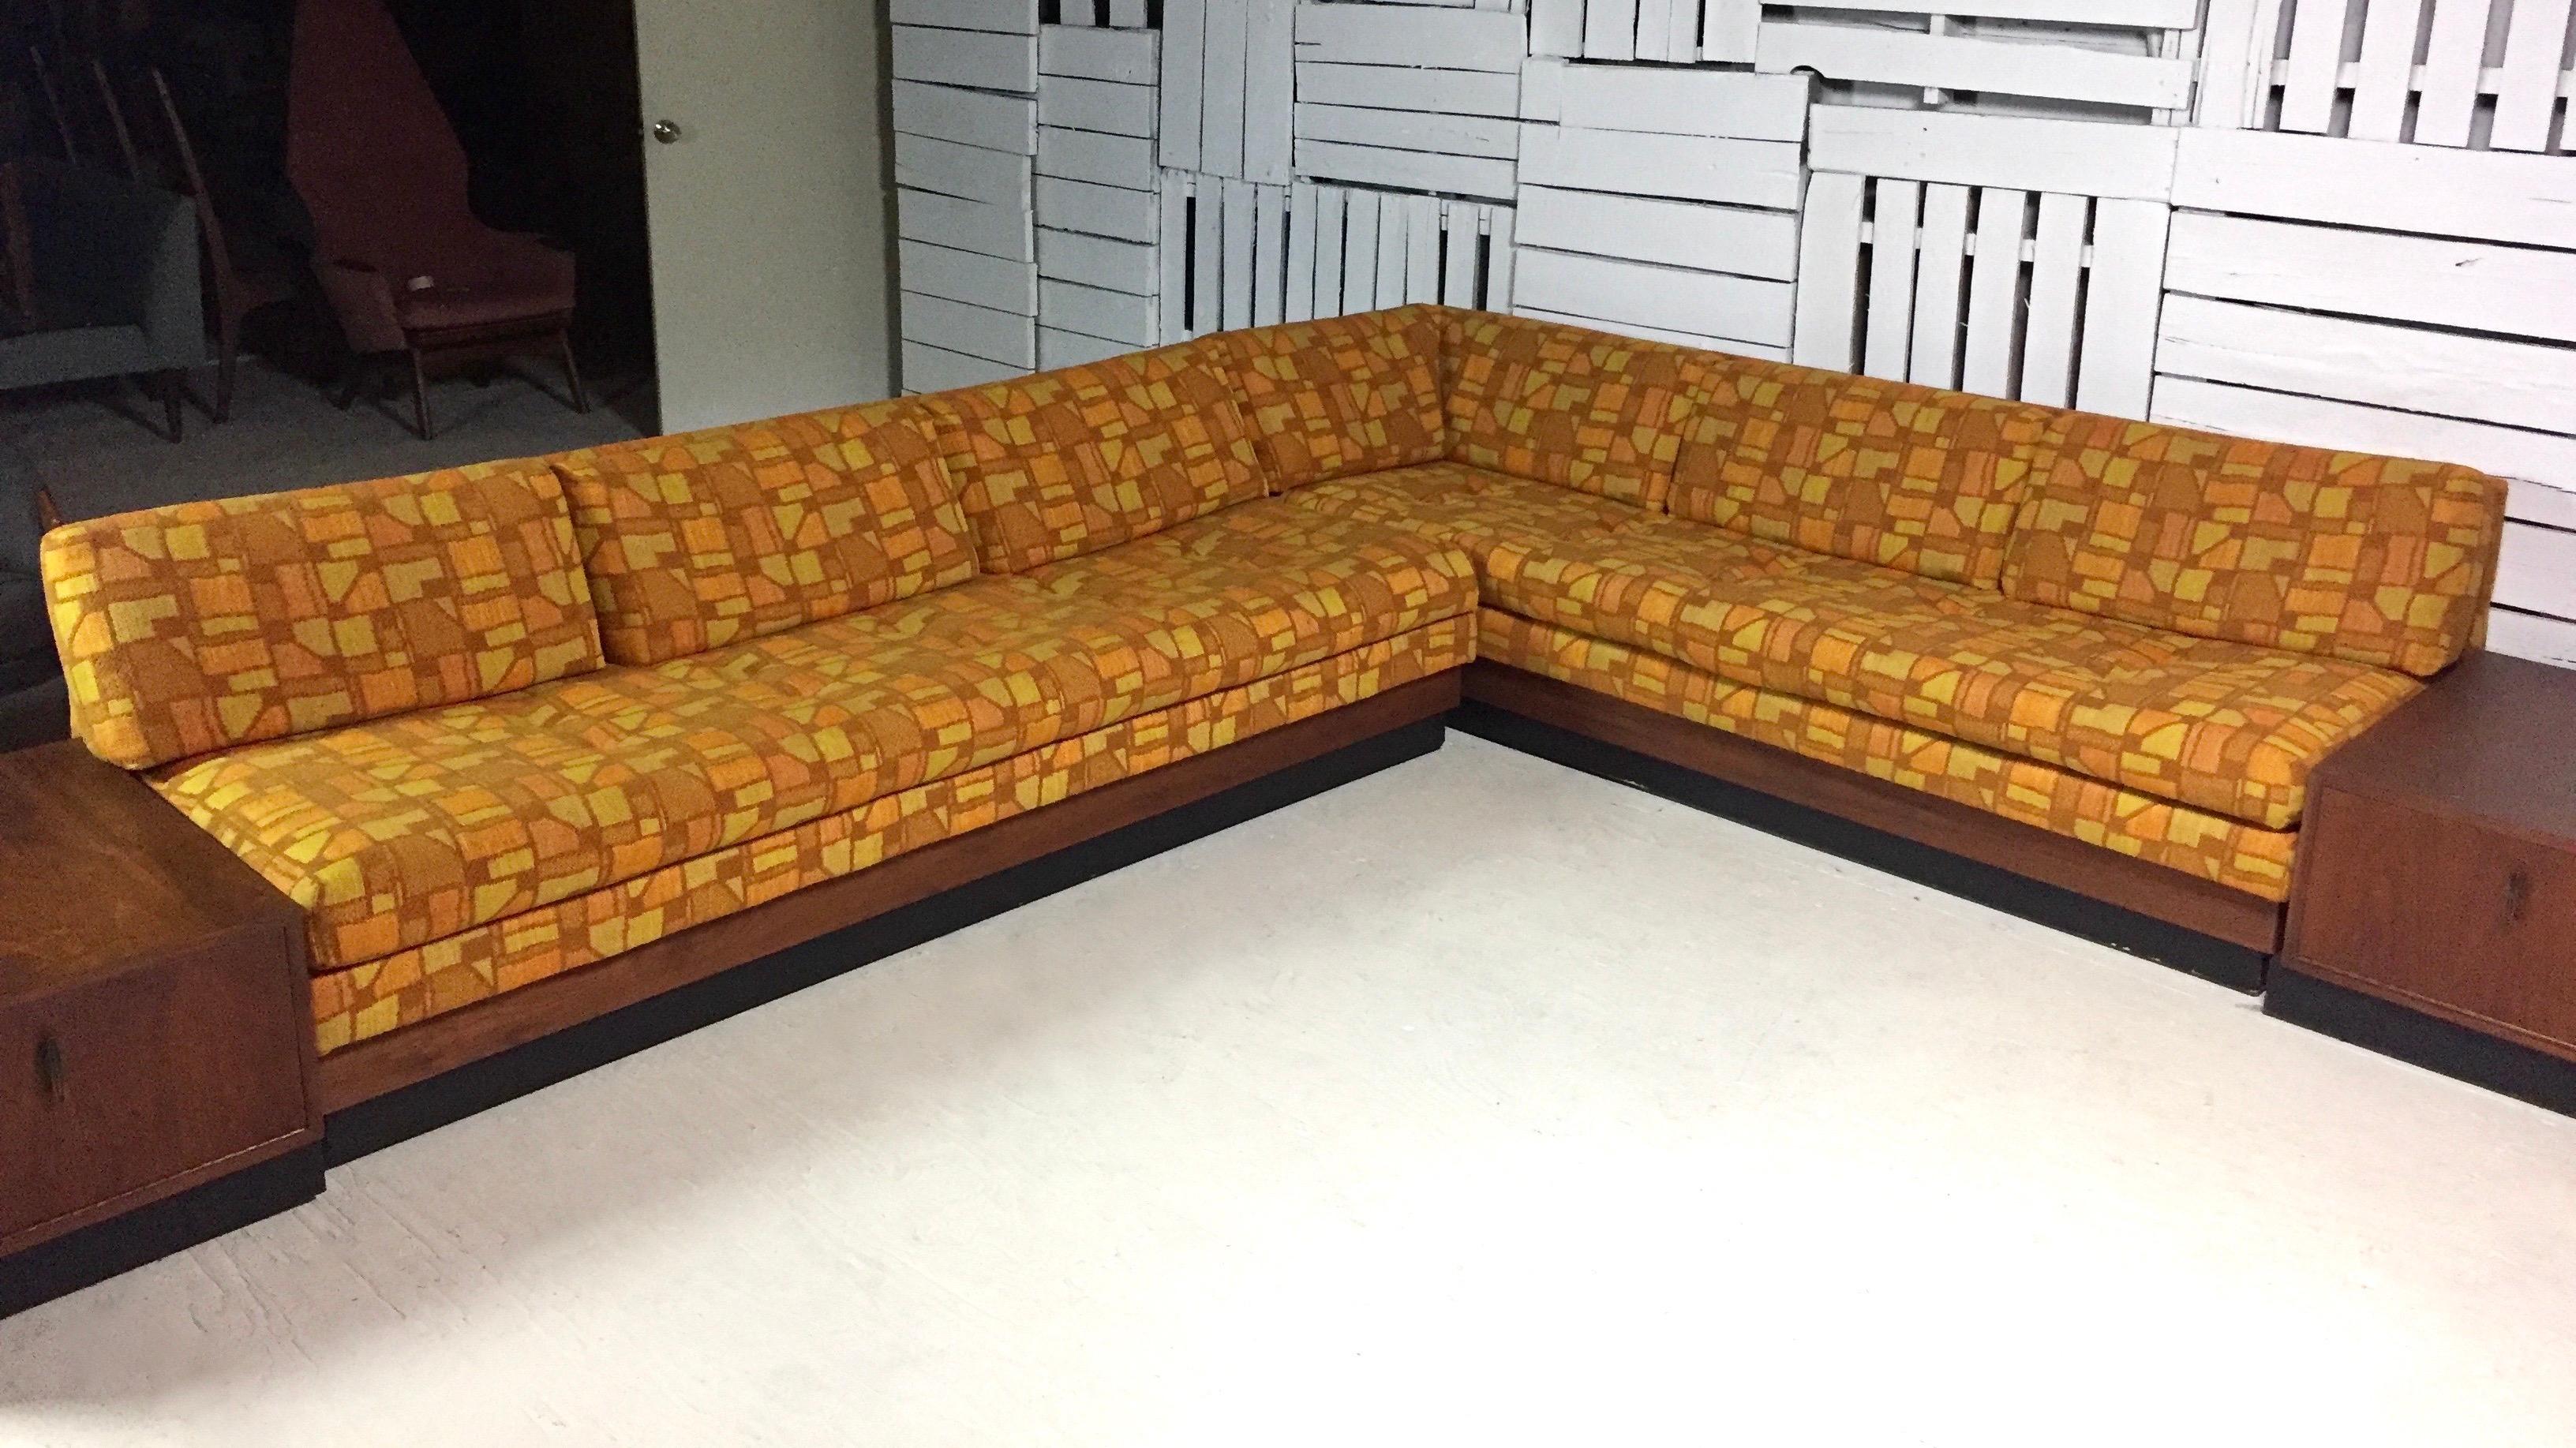 Authentic Adrian Pearsall sectionals are some of his most dramatic creations. They also need space! Please peruse our growing collection of rare Pearsall pieces which we will be listing this month.

Adrian Pearsall two-piece sectional sofa by Craft